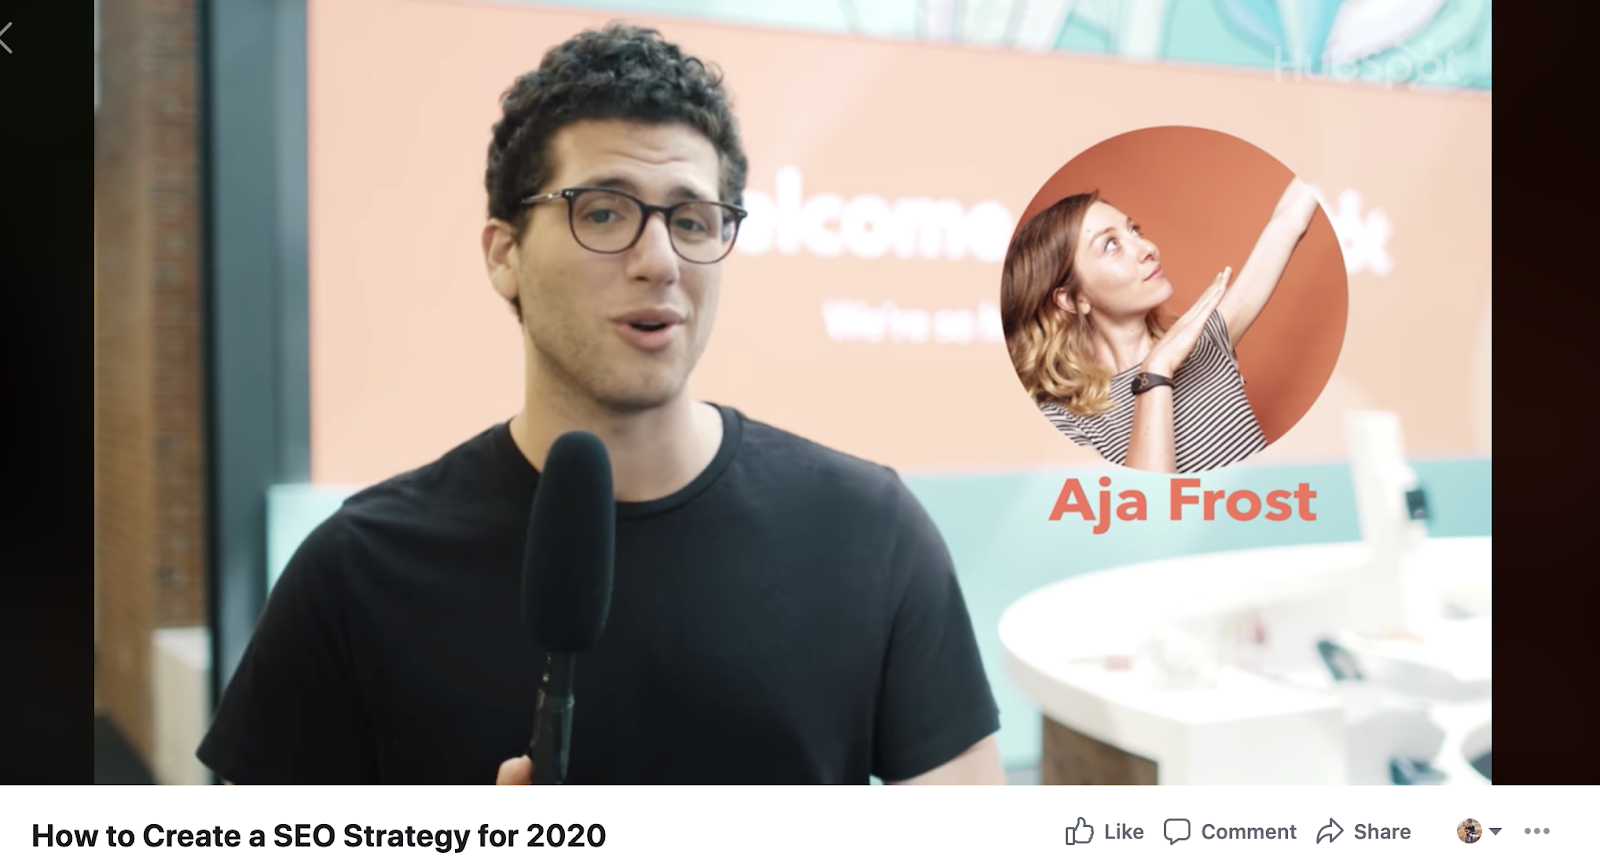 Facebook live video thumbnail from HubSpot's How to Create a SEO Strategy for 2020 content